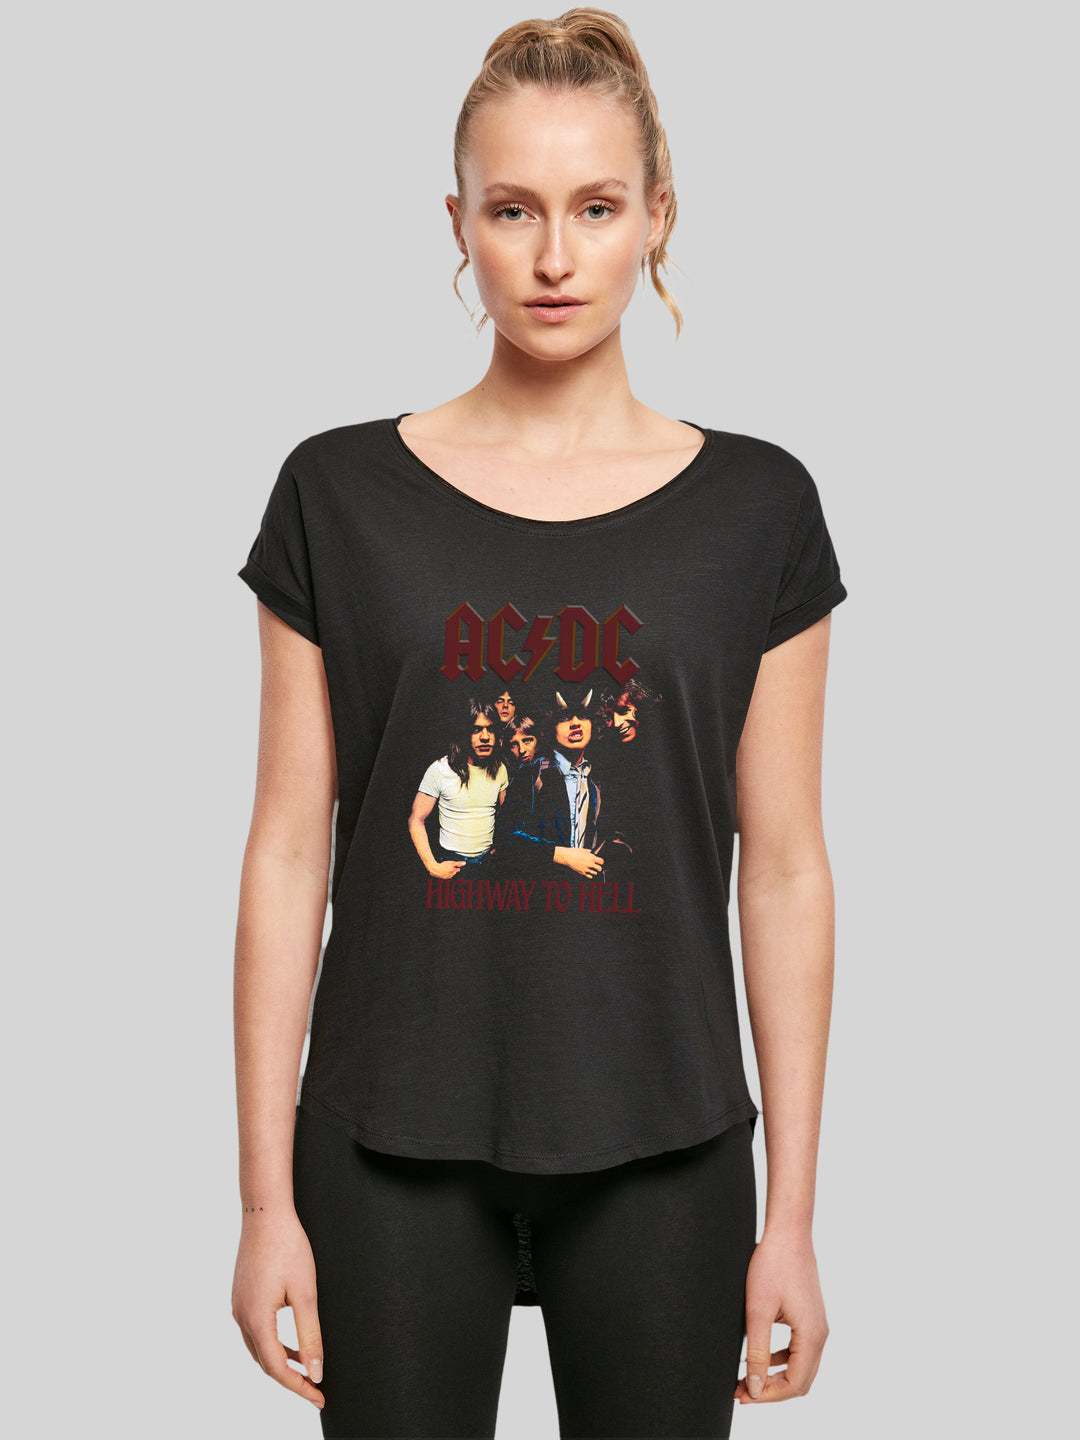 ACDC Highway To Hell Group with Ladies Long Slub Tee